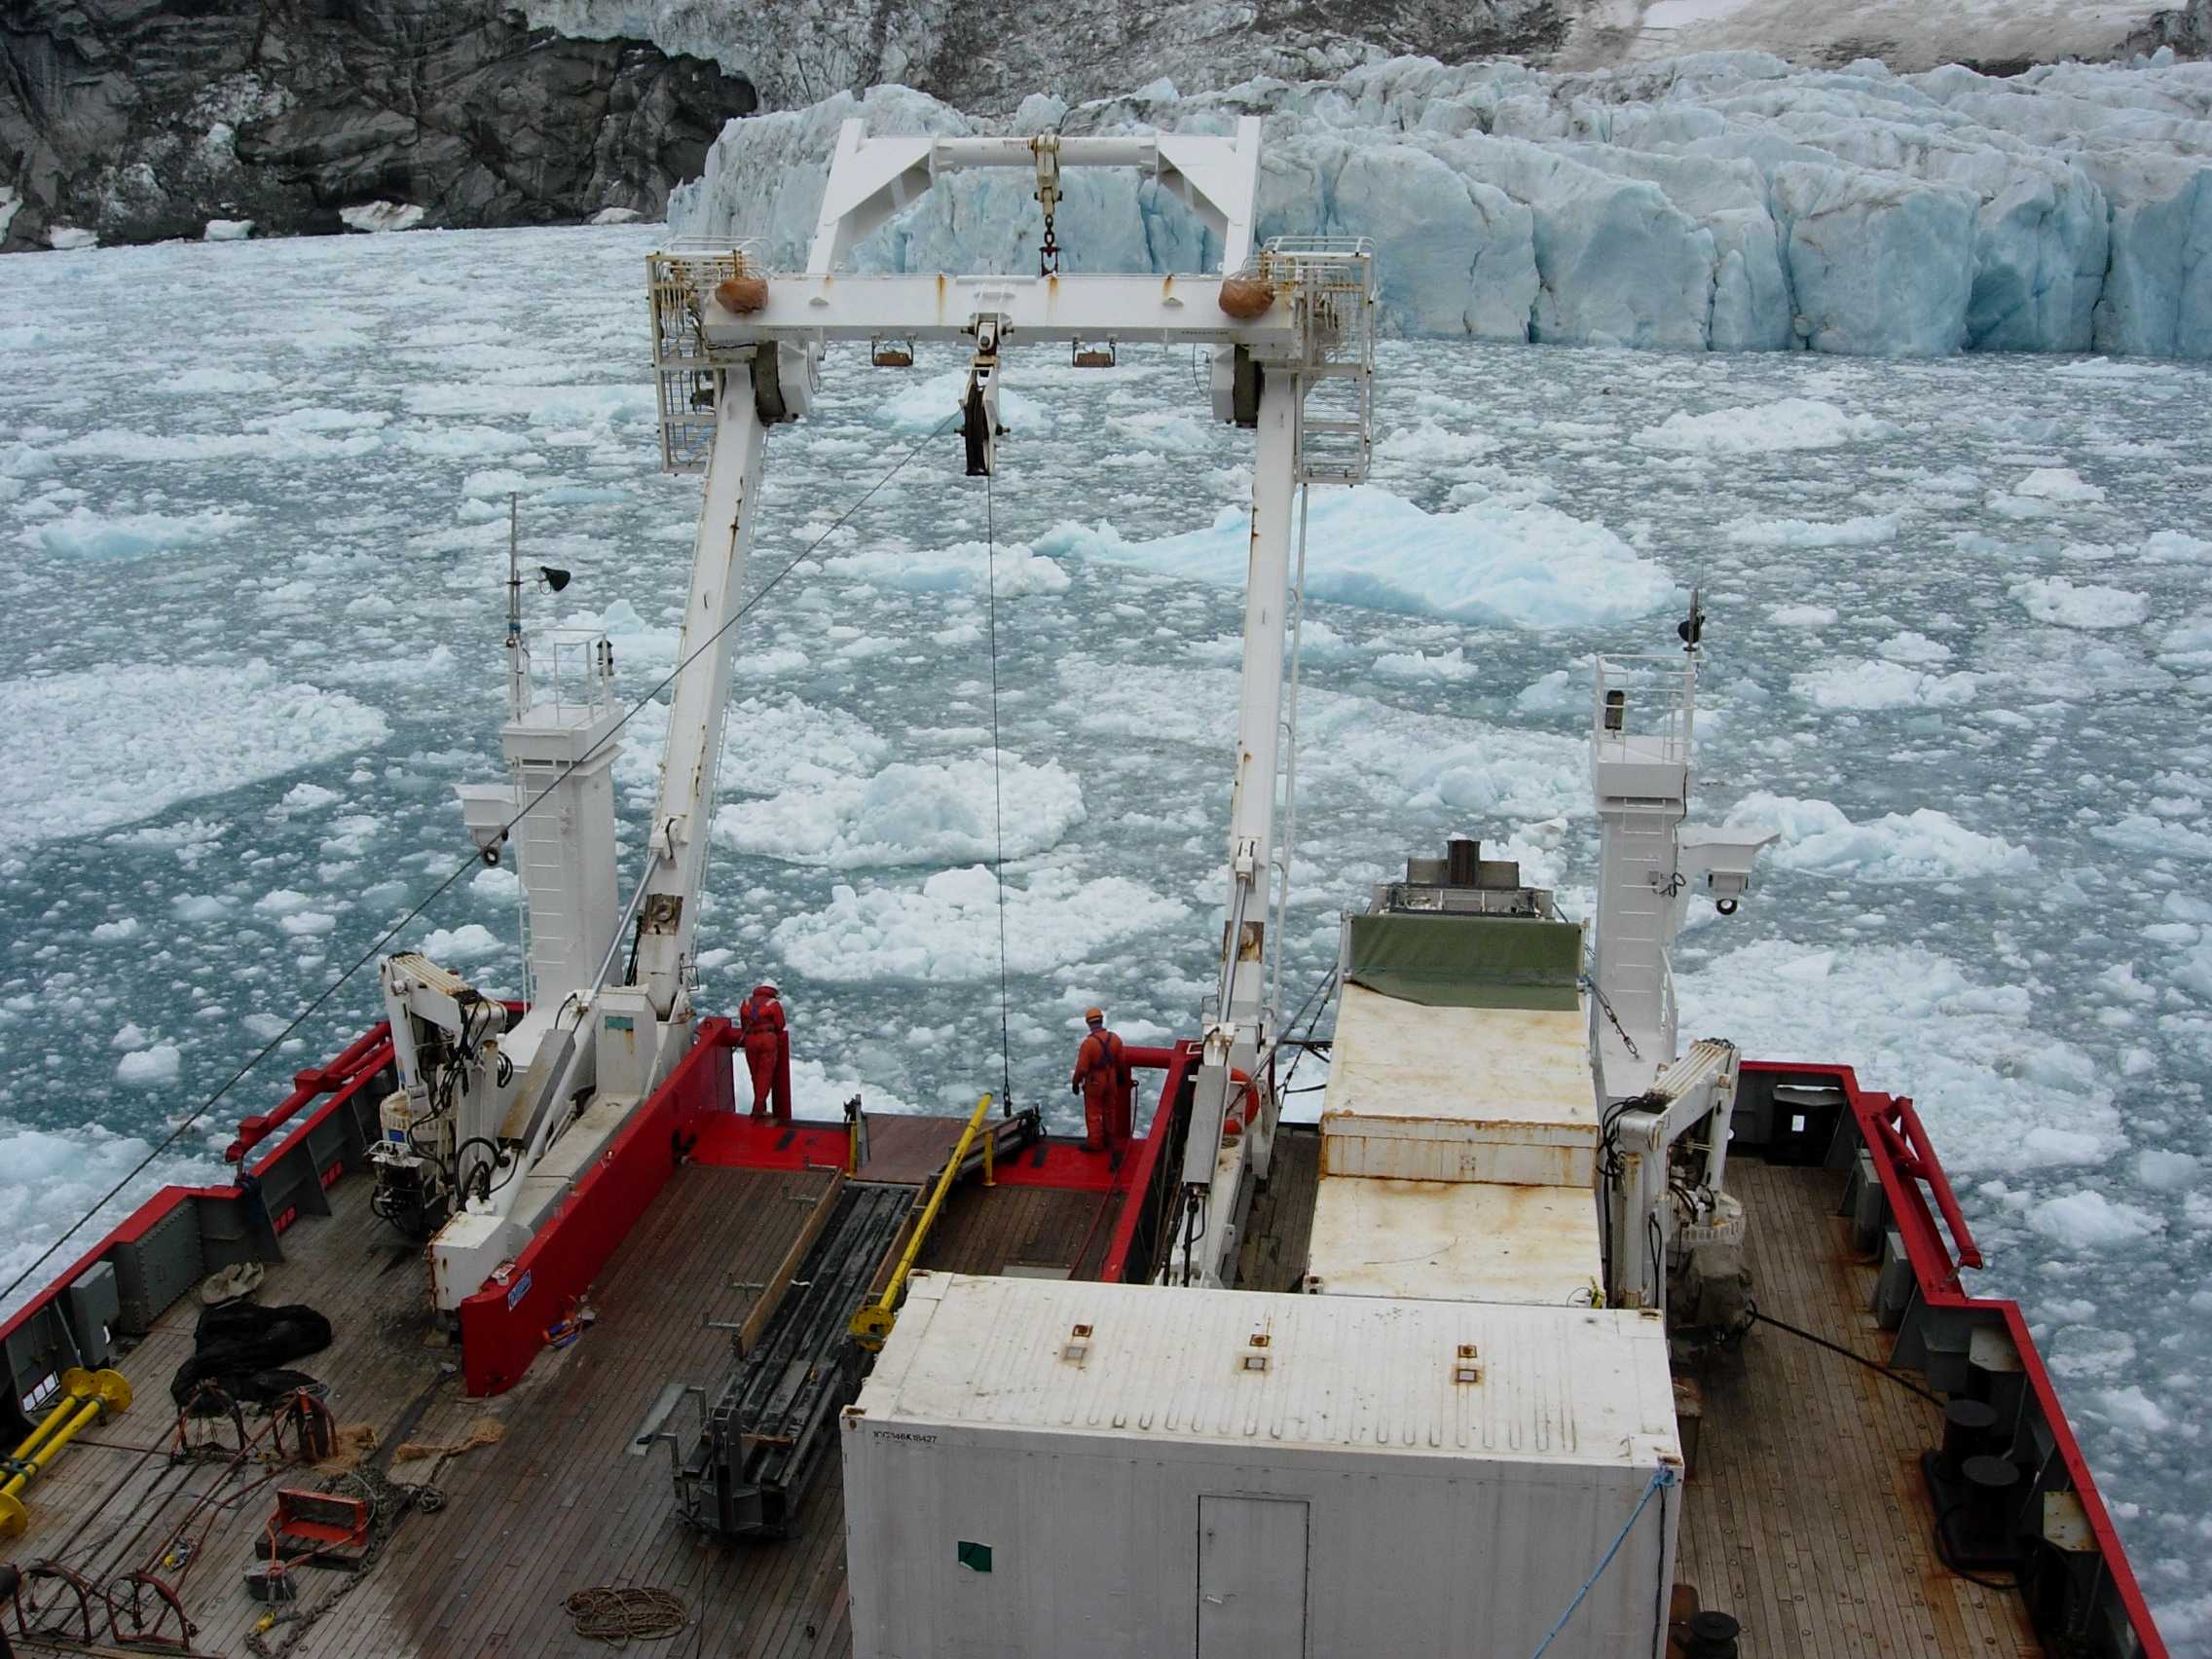 Ship-based investigations to reconstruct Greenland Ice Sheet history